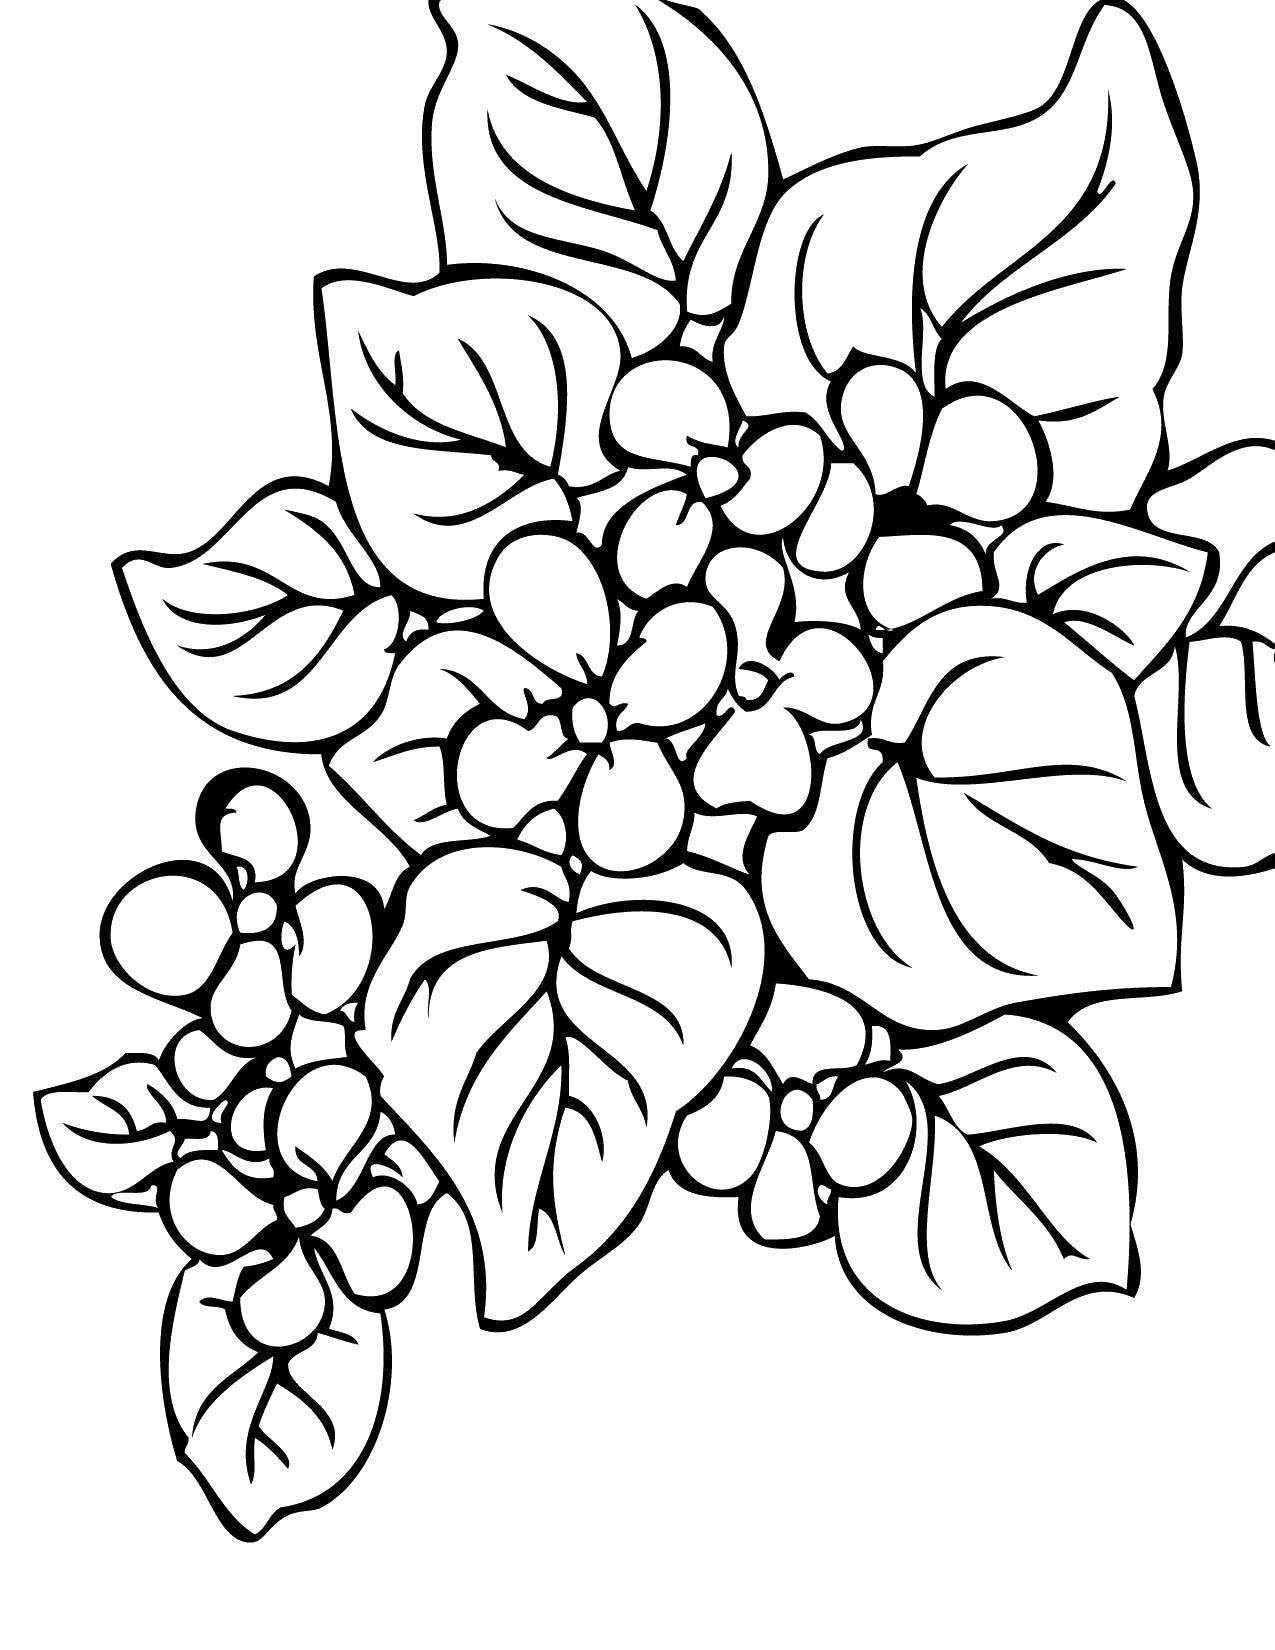 Coloring A beautiful bouquet of flowers. Category flowers. Tags:  Flowers, bouquet.